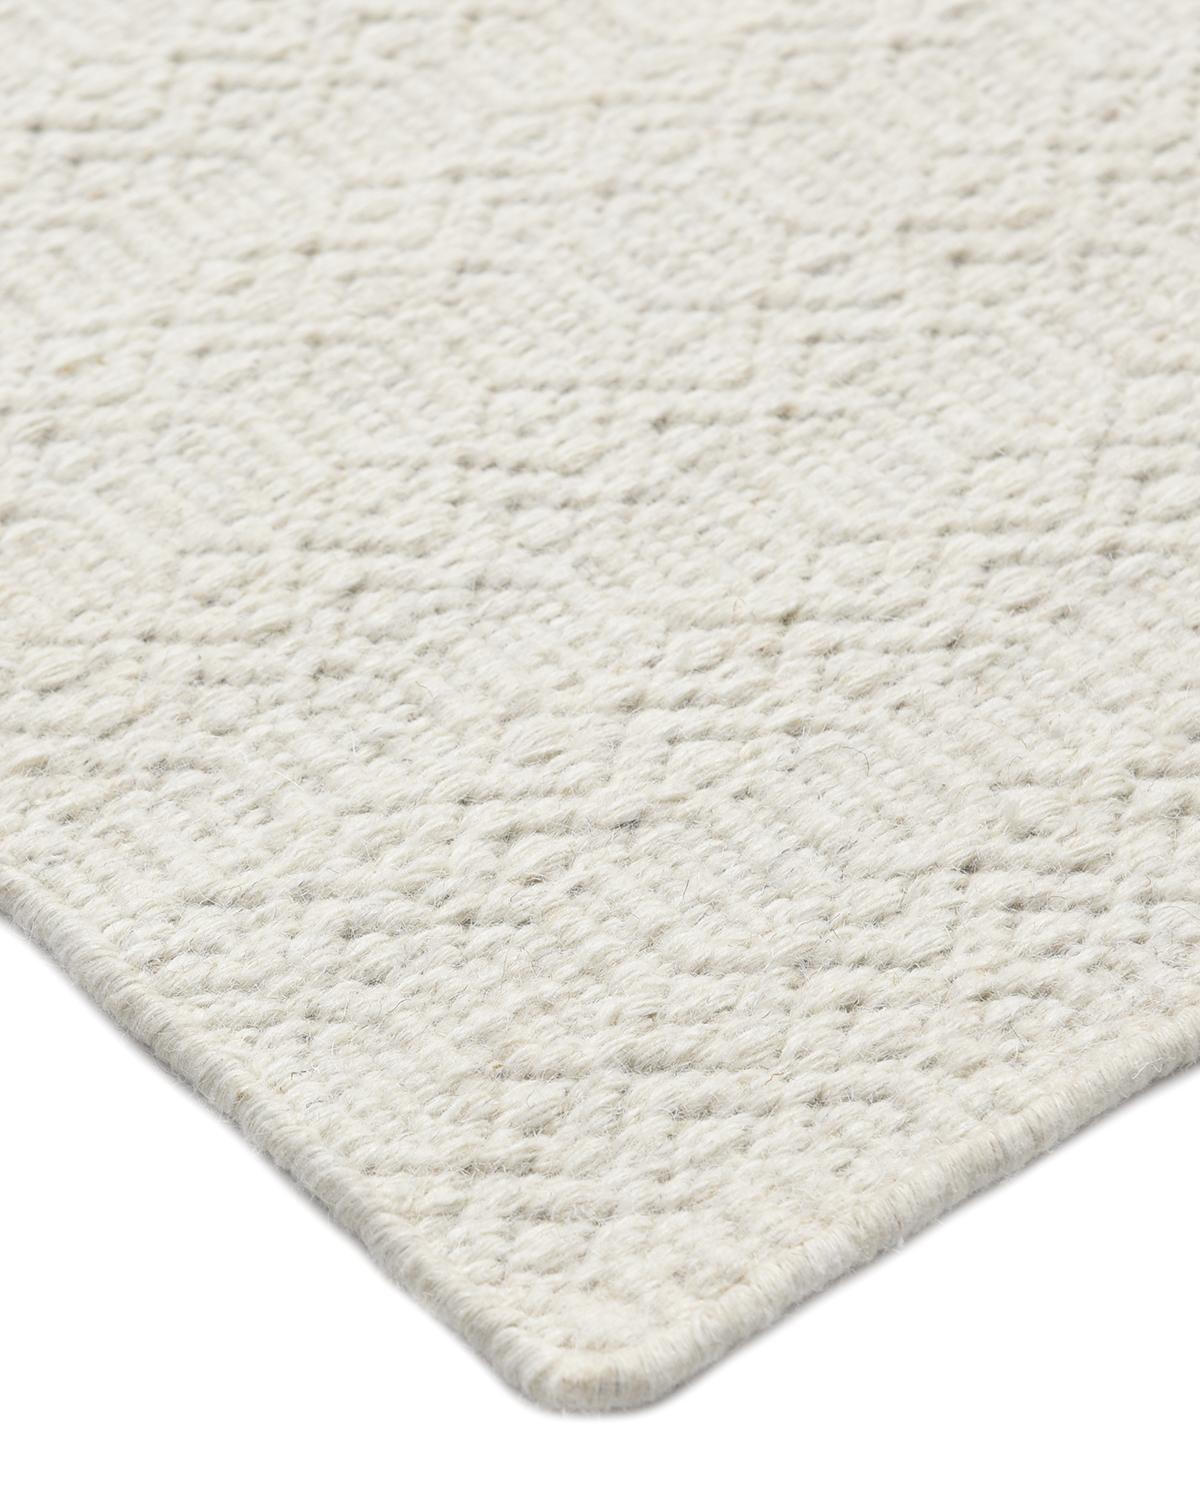 Color: Ivory. Made In: India. 80% Wool, 20% Cotton. Durable and low-maintenance, flatweave rugs are especially popular for high-traffic rooms and in households with children and pets. The handwoven rugs in the Flatweave collection are beautiful as